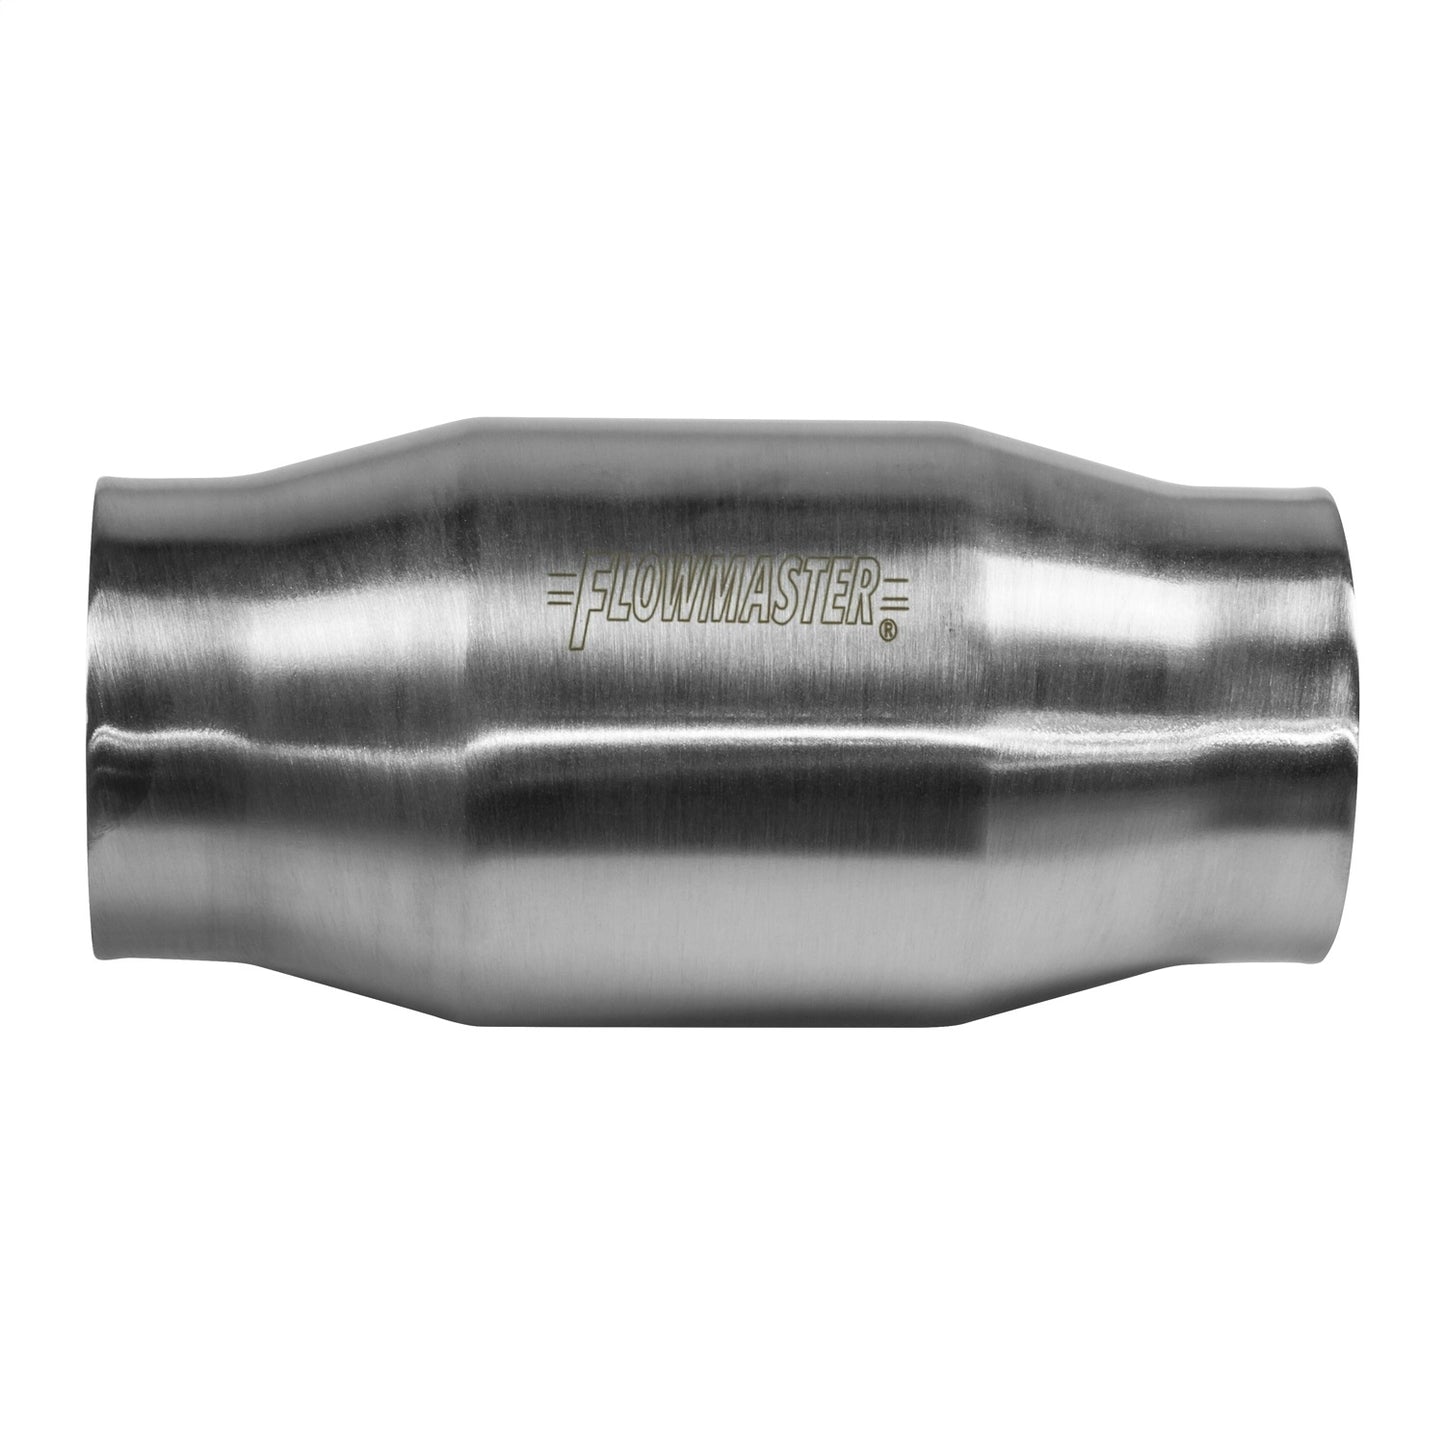 2000130 Flowmaster Catalytic Converters Catalytic Converter - Universal - 200 Series - 3.00 in. Inlet/Outlet - 49 State